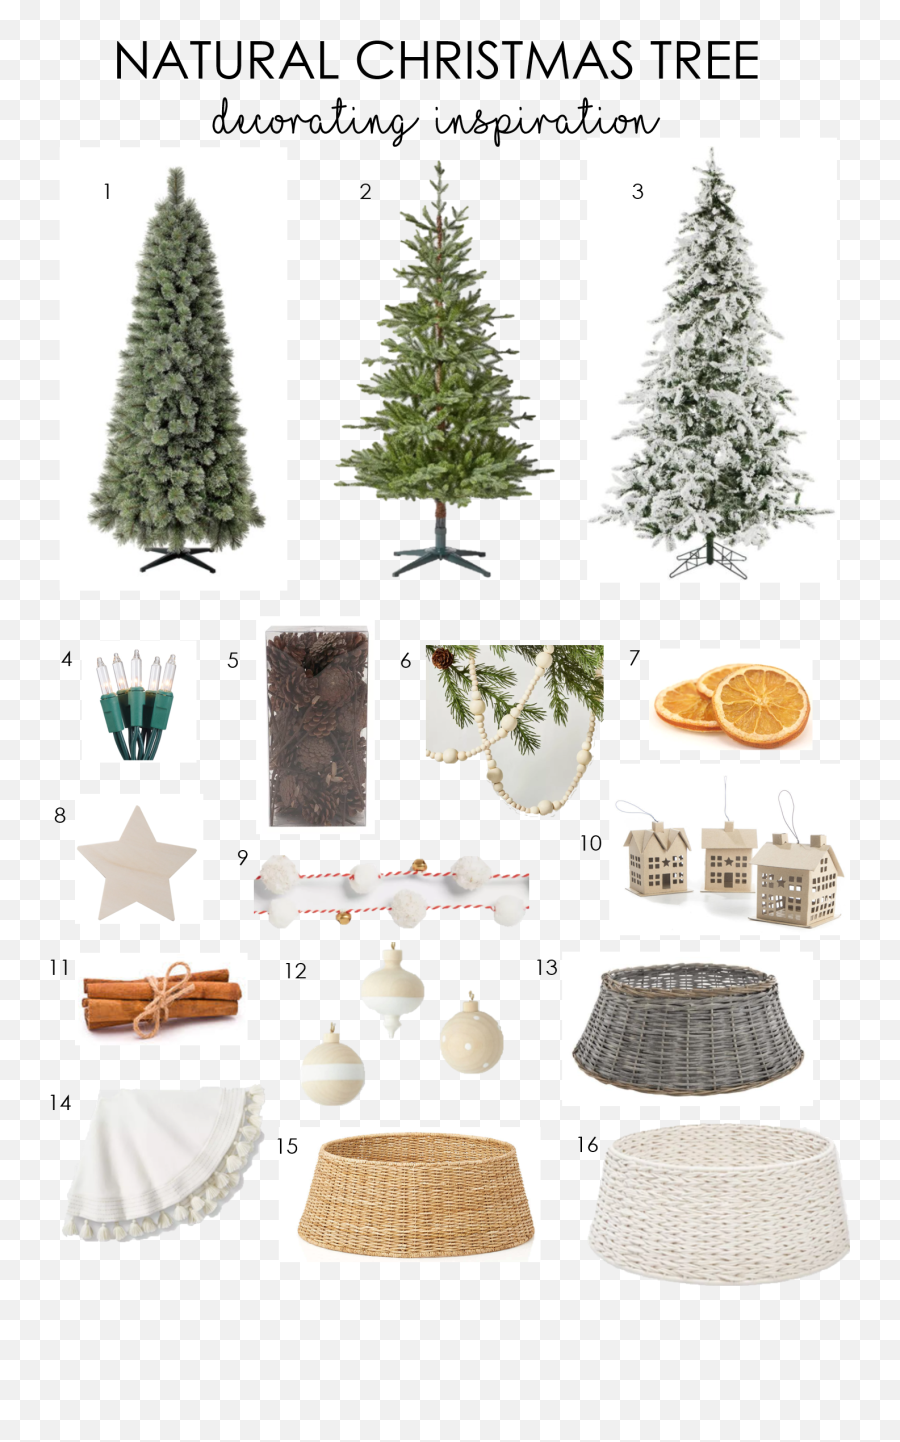 How To Decorate A Natural Christmas Tree Sew Bake Decorate Emoji,Charlie Brown Christmas Tree Png